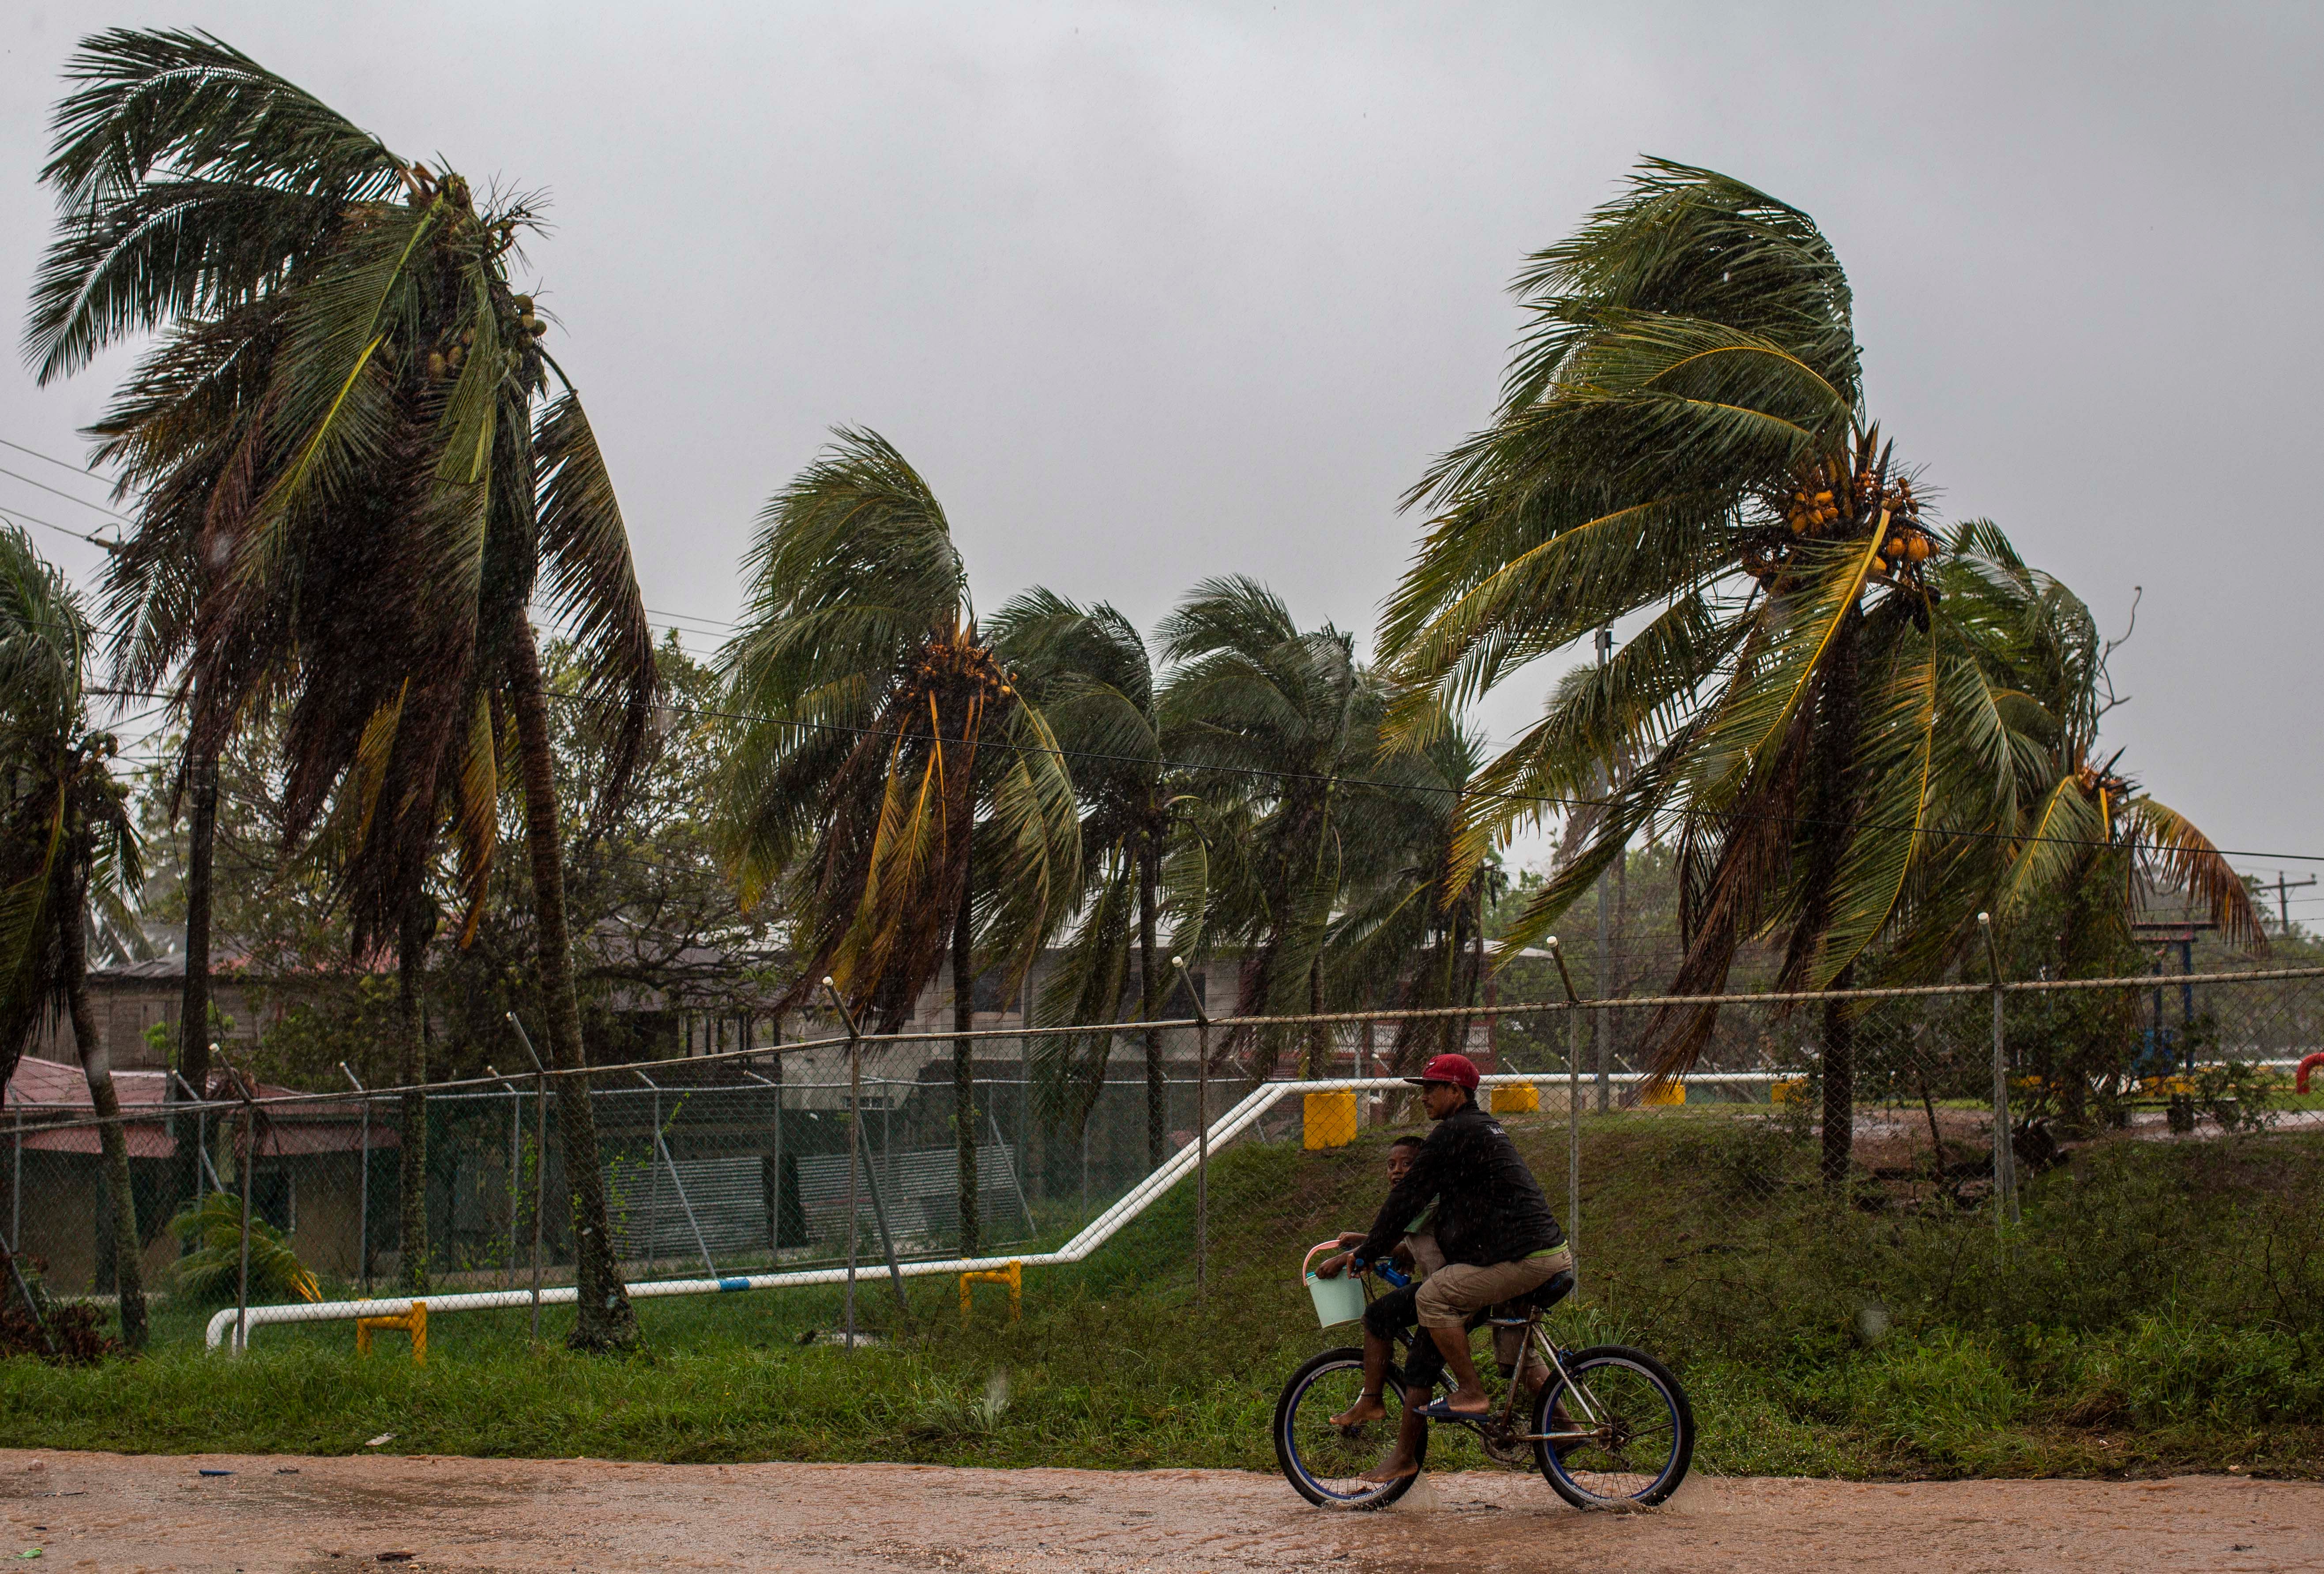 Hurricane Iota strengthened into a "catastrophic" Category 5 hurricane and was set to slam into Central America late Monday, threatening areas devastated by a powerful storm just two weeks ago